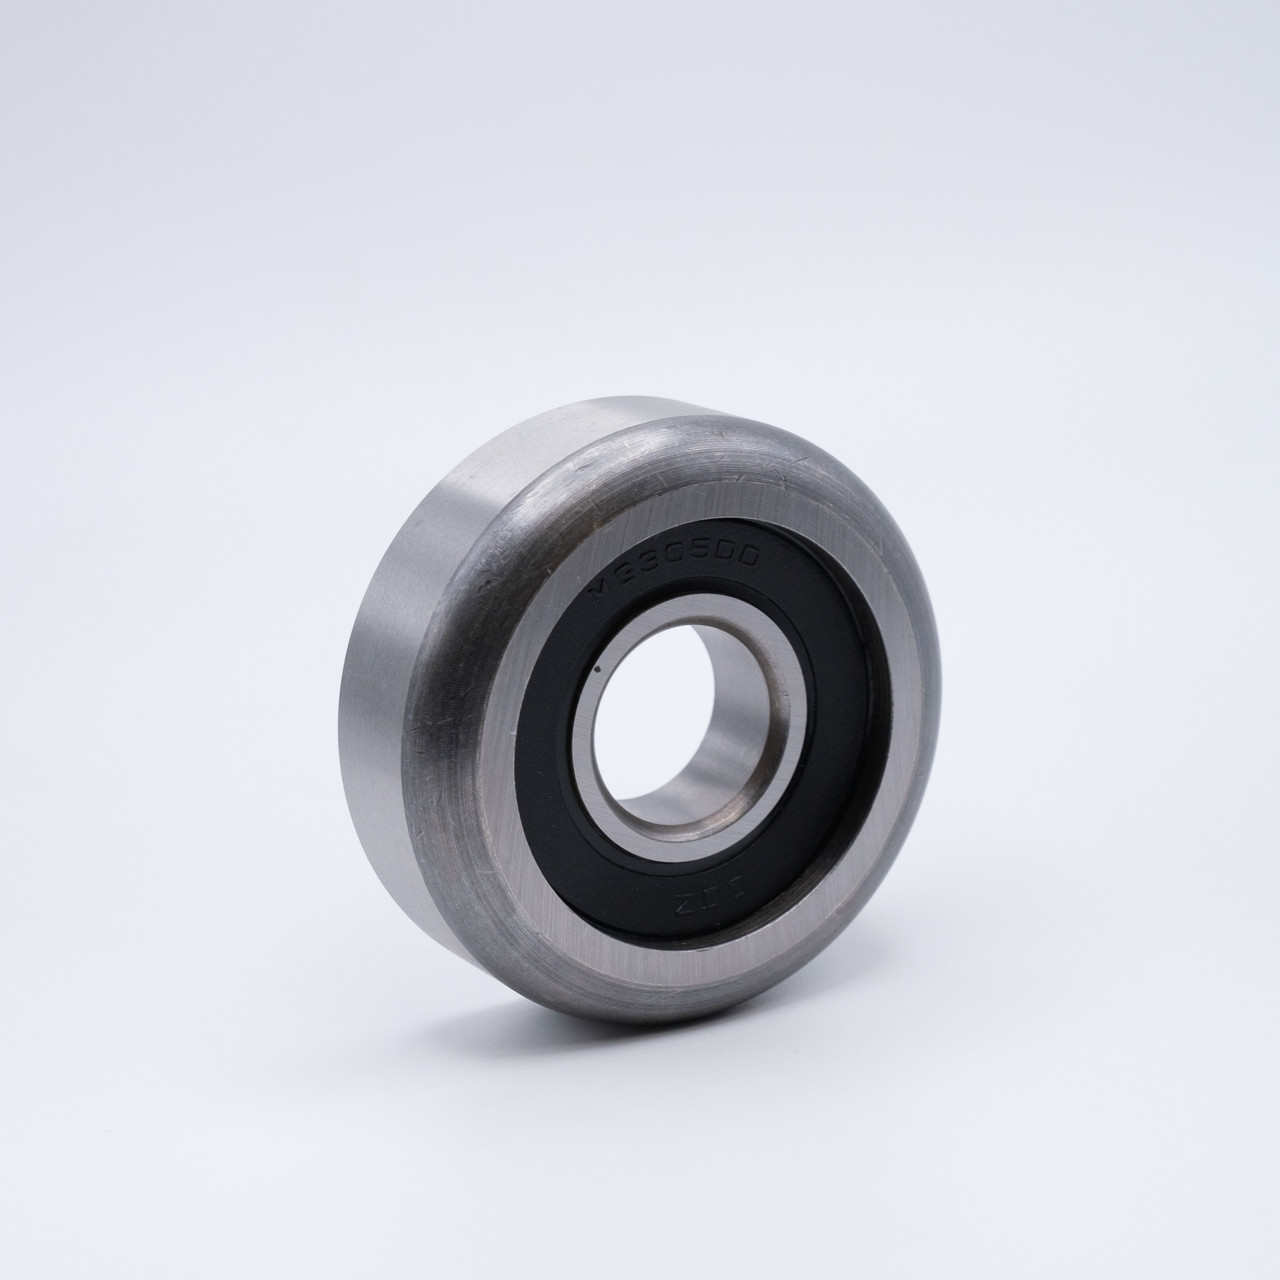 MG306-2RS-1 Mast Guide Ball Bearing 30mm Bore Left Side Angled View